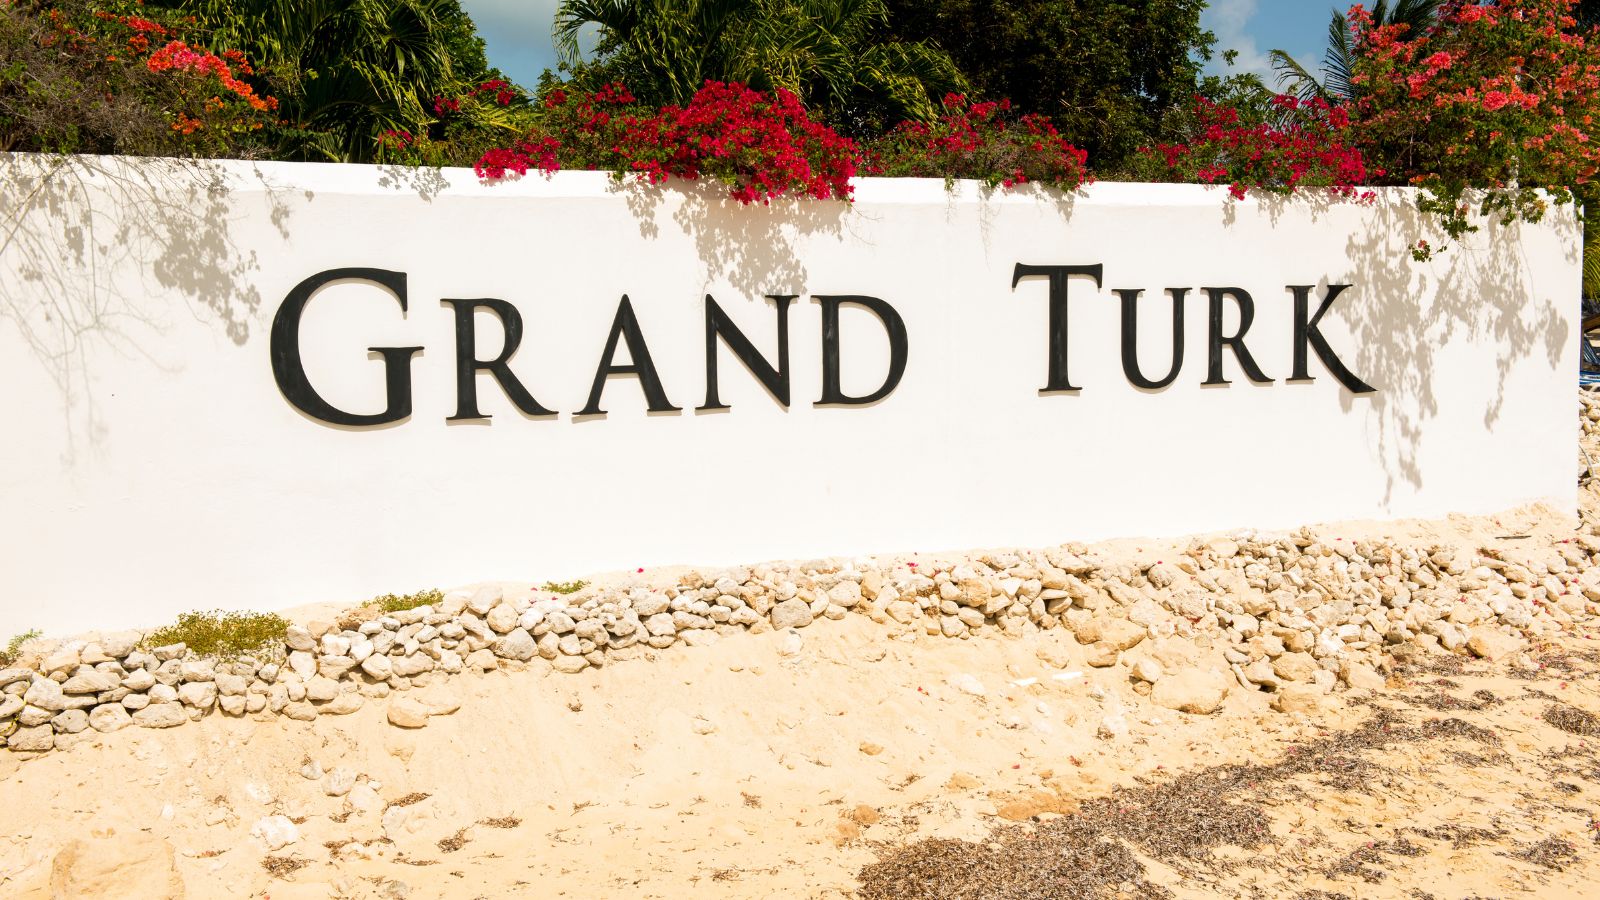 14.) Visit the Turks and Caicos National Museum (Grand Turk)